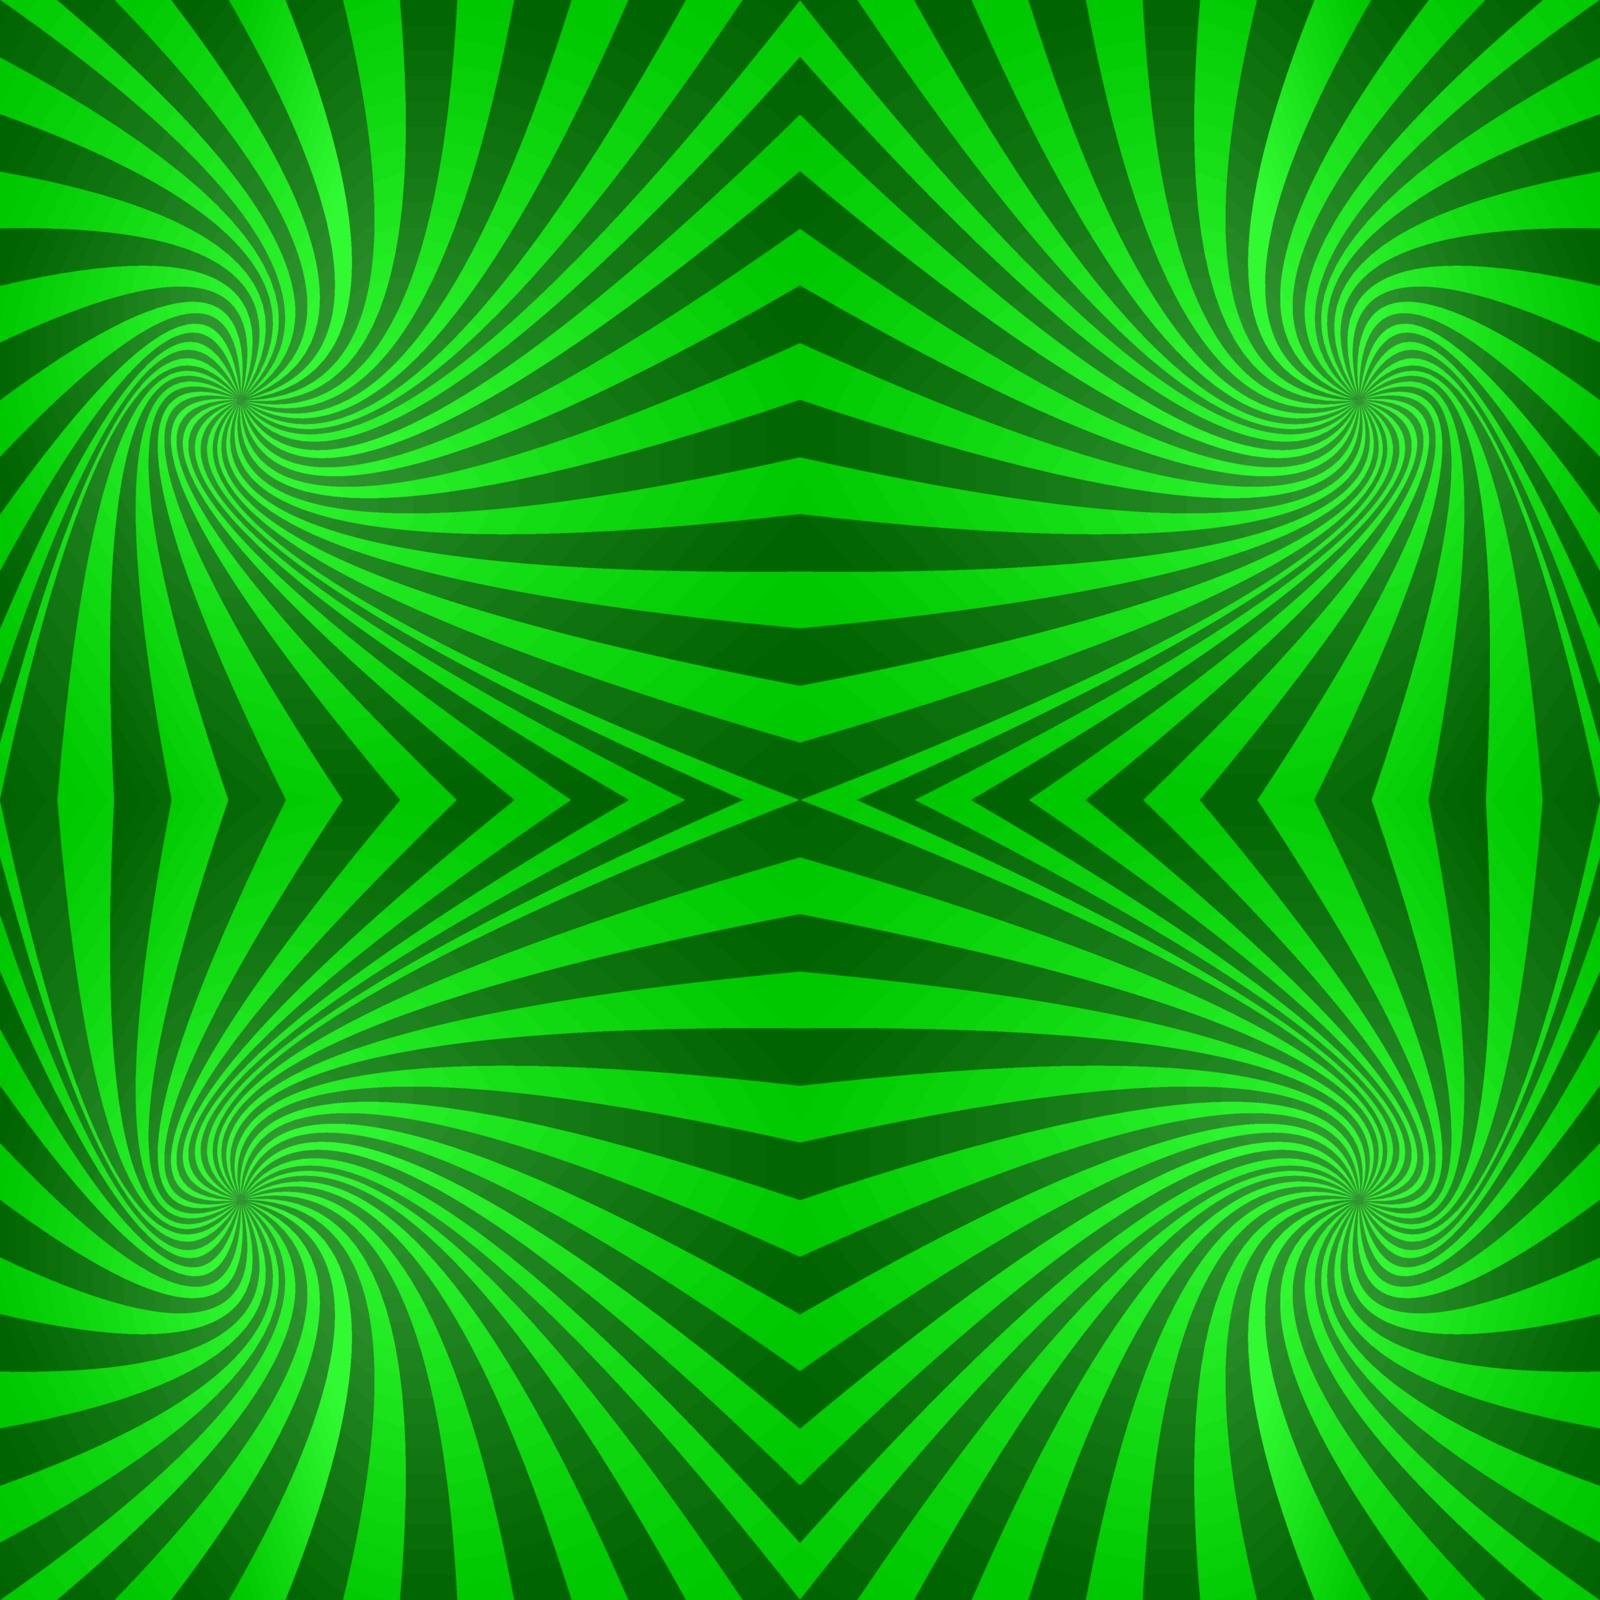 Seamless green abstract swirl pattern background design